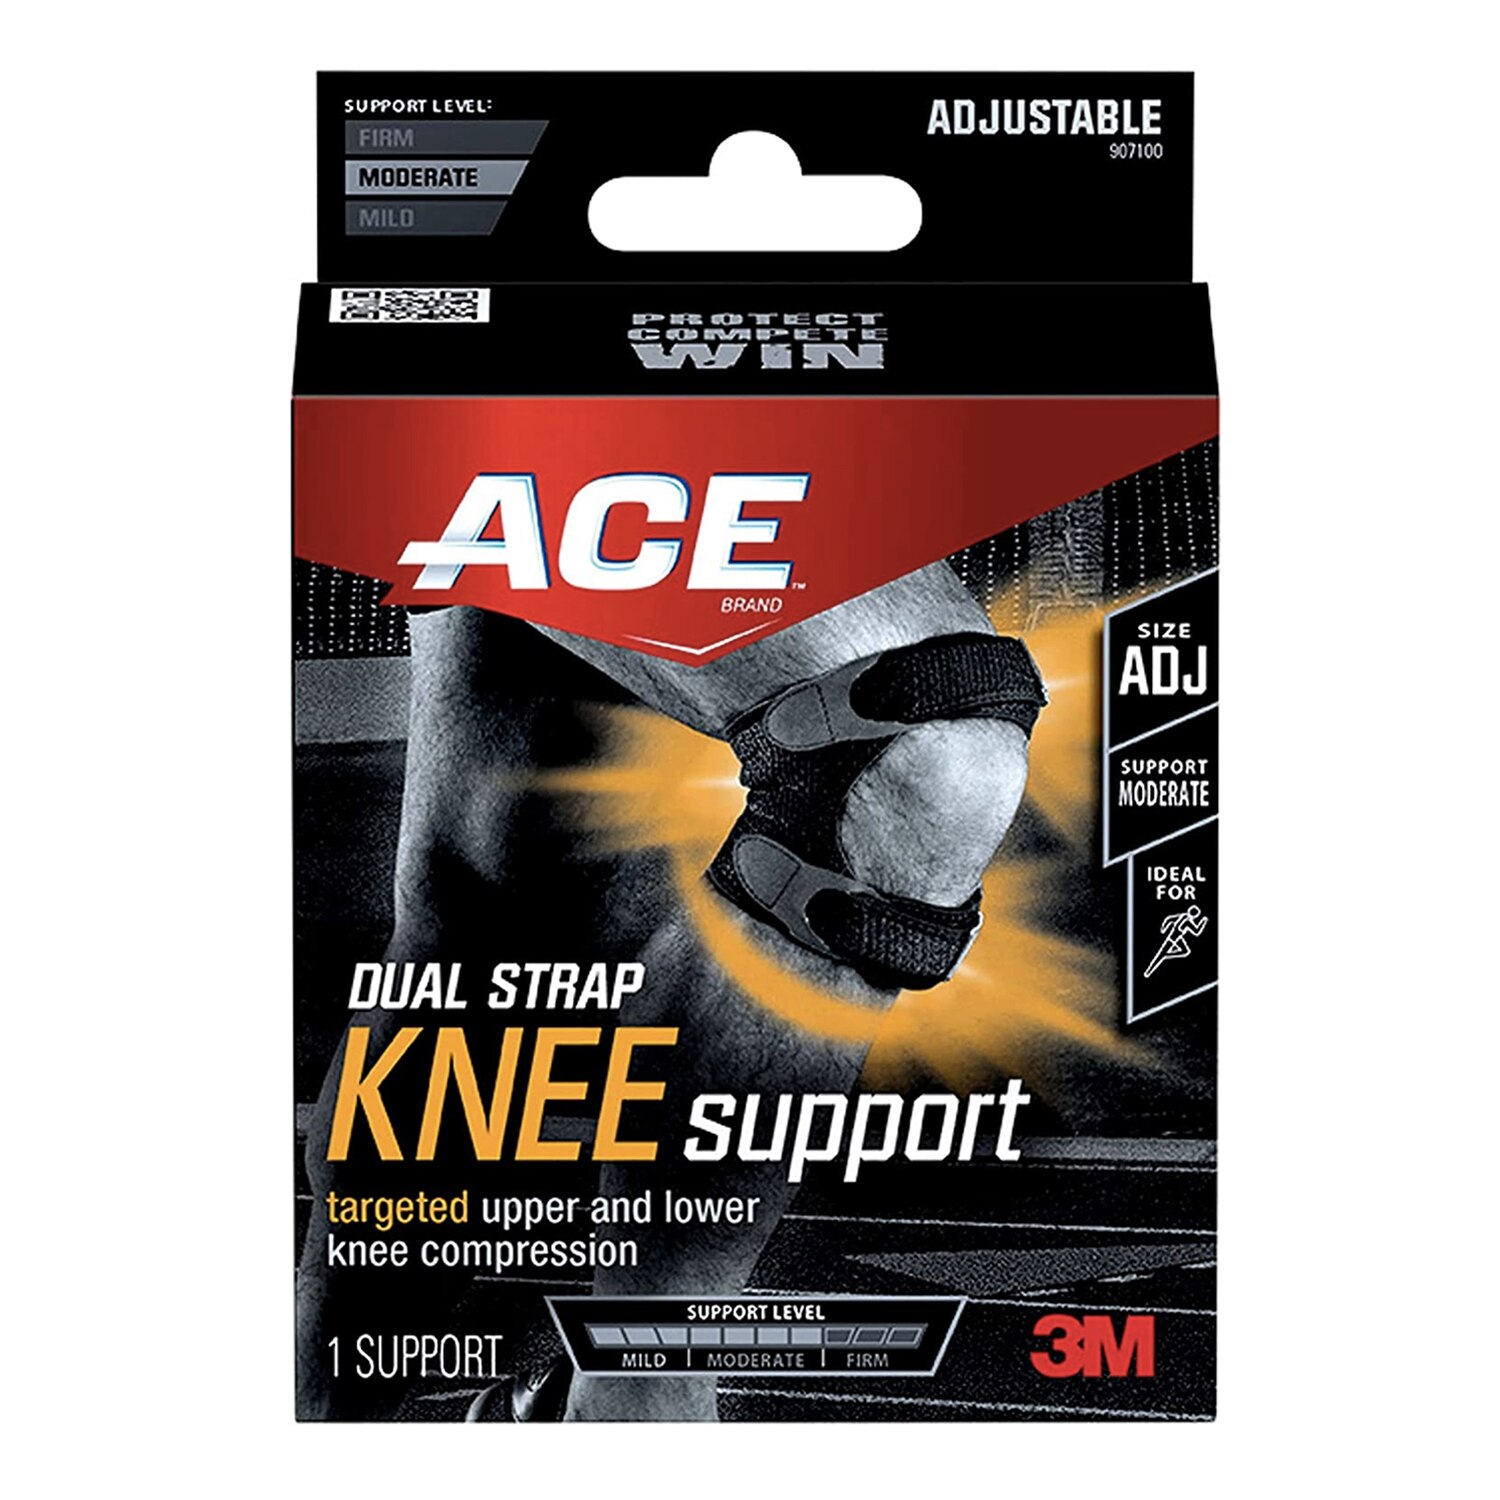 ACE Brand Dual Strap Knee Support, Adjustable